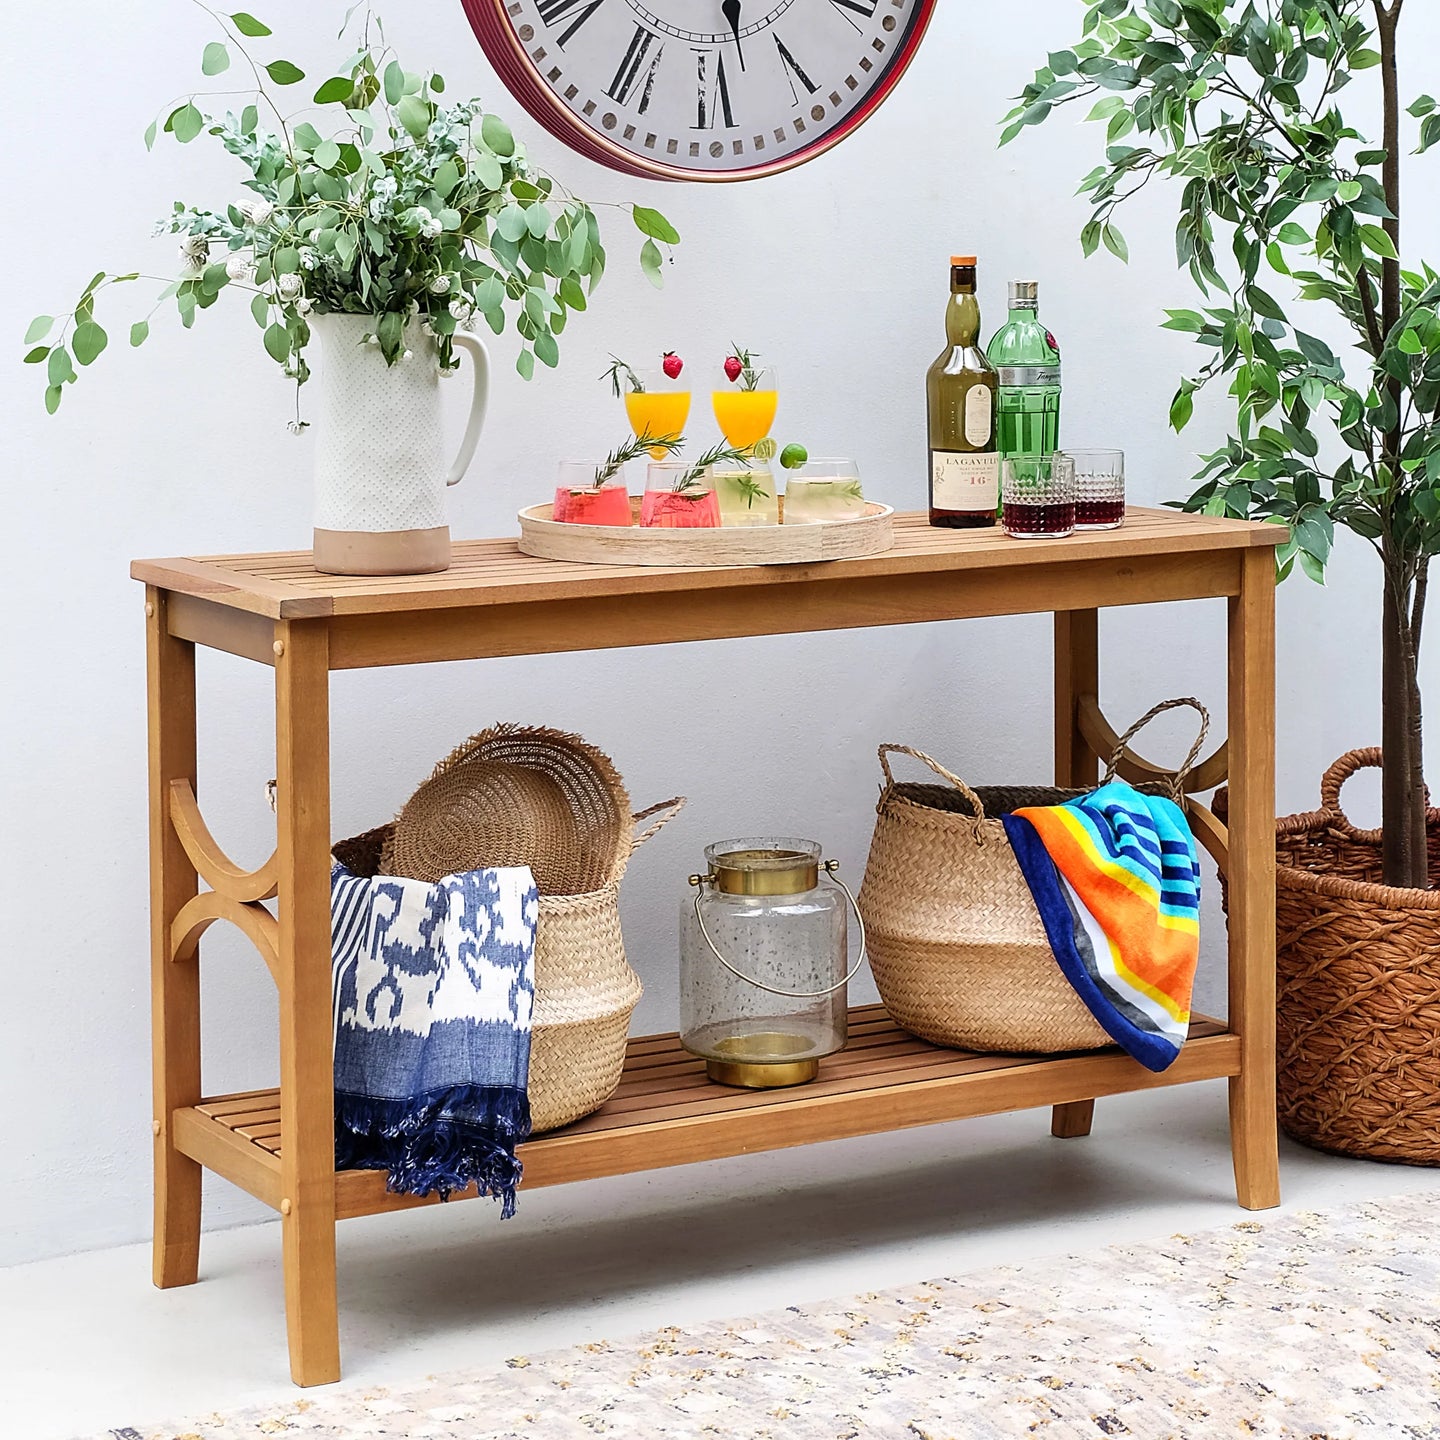 How to Choose the Perfect Console Table with Storage for Your Outdoor Space